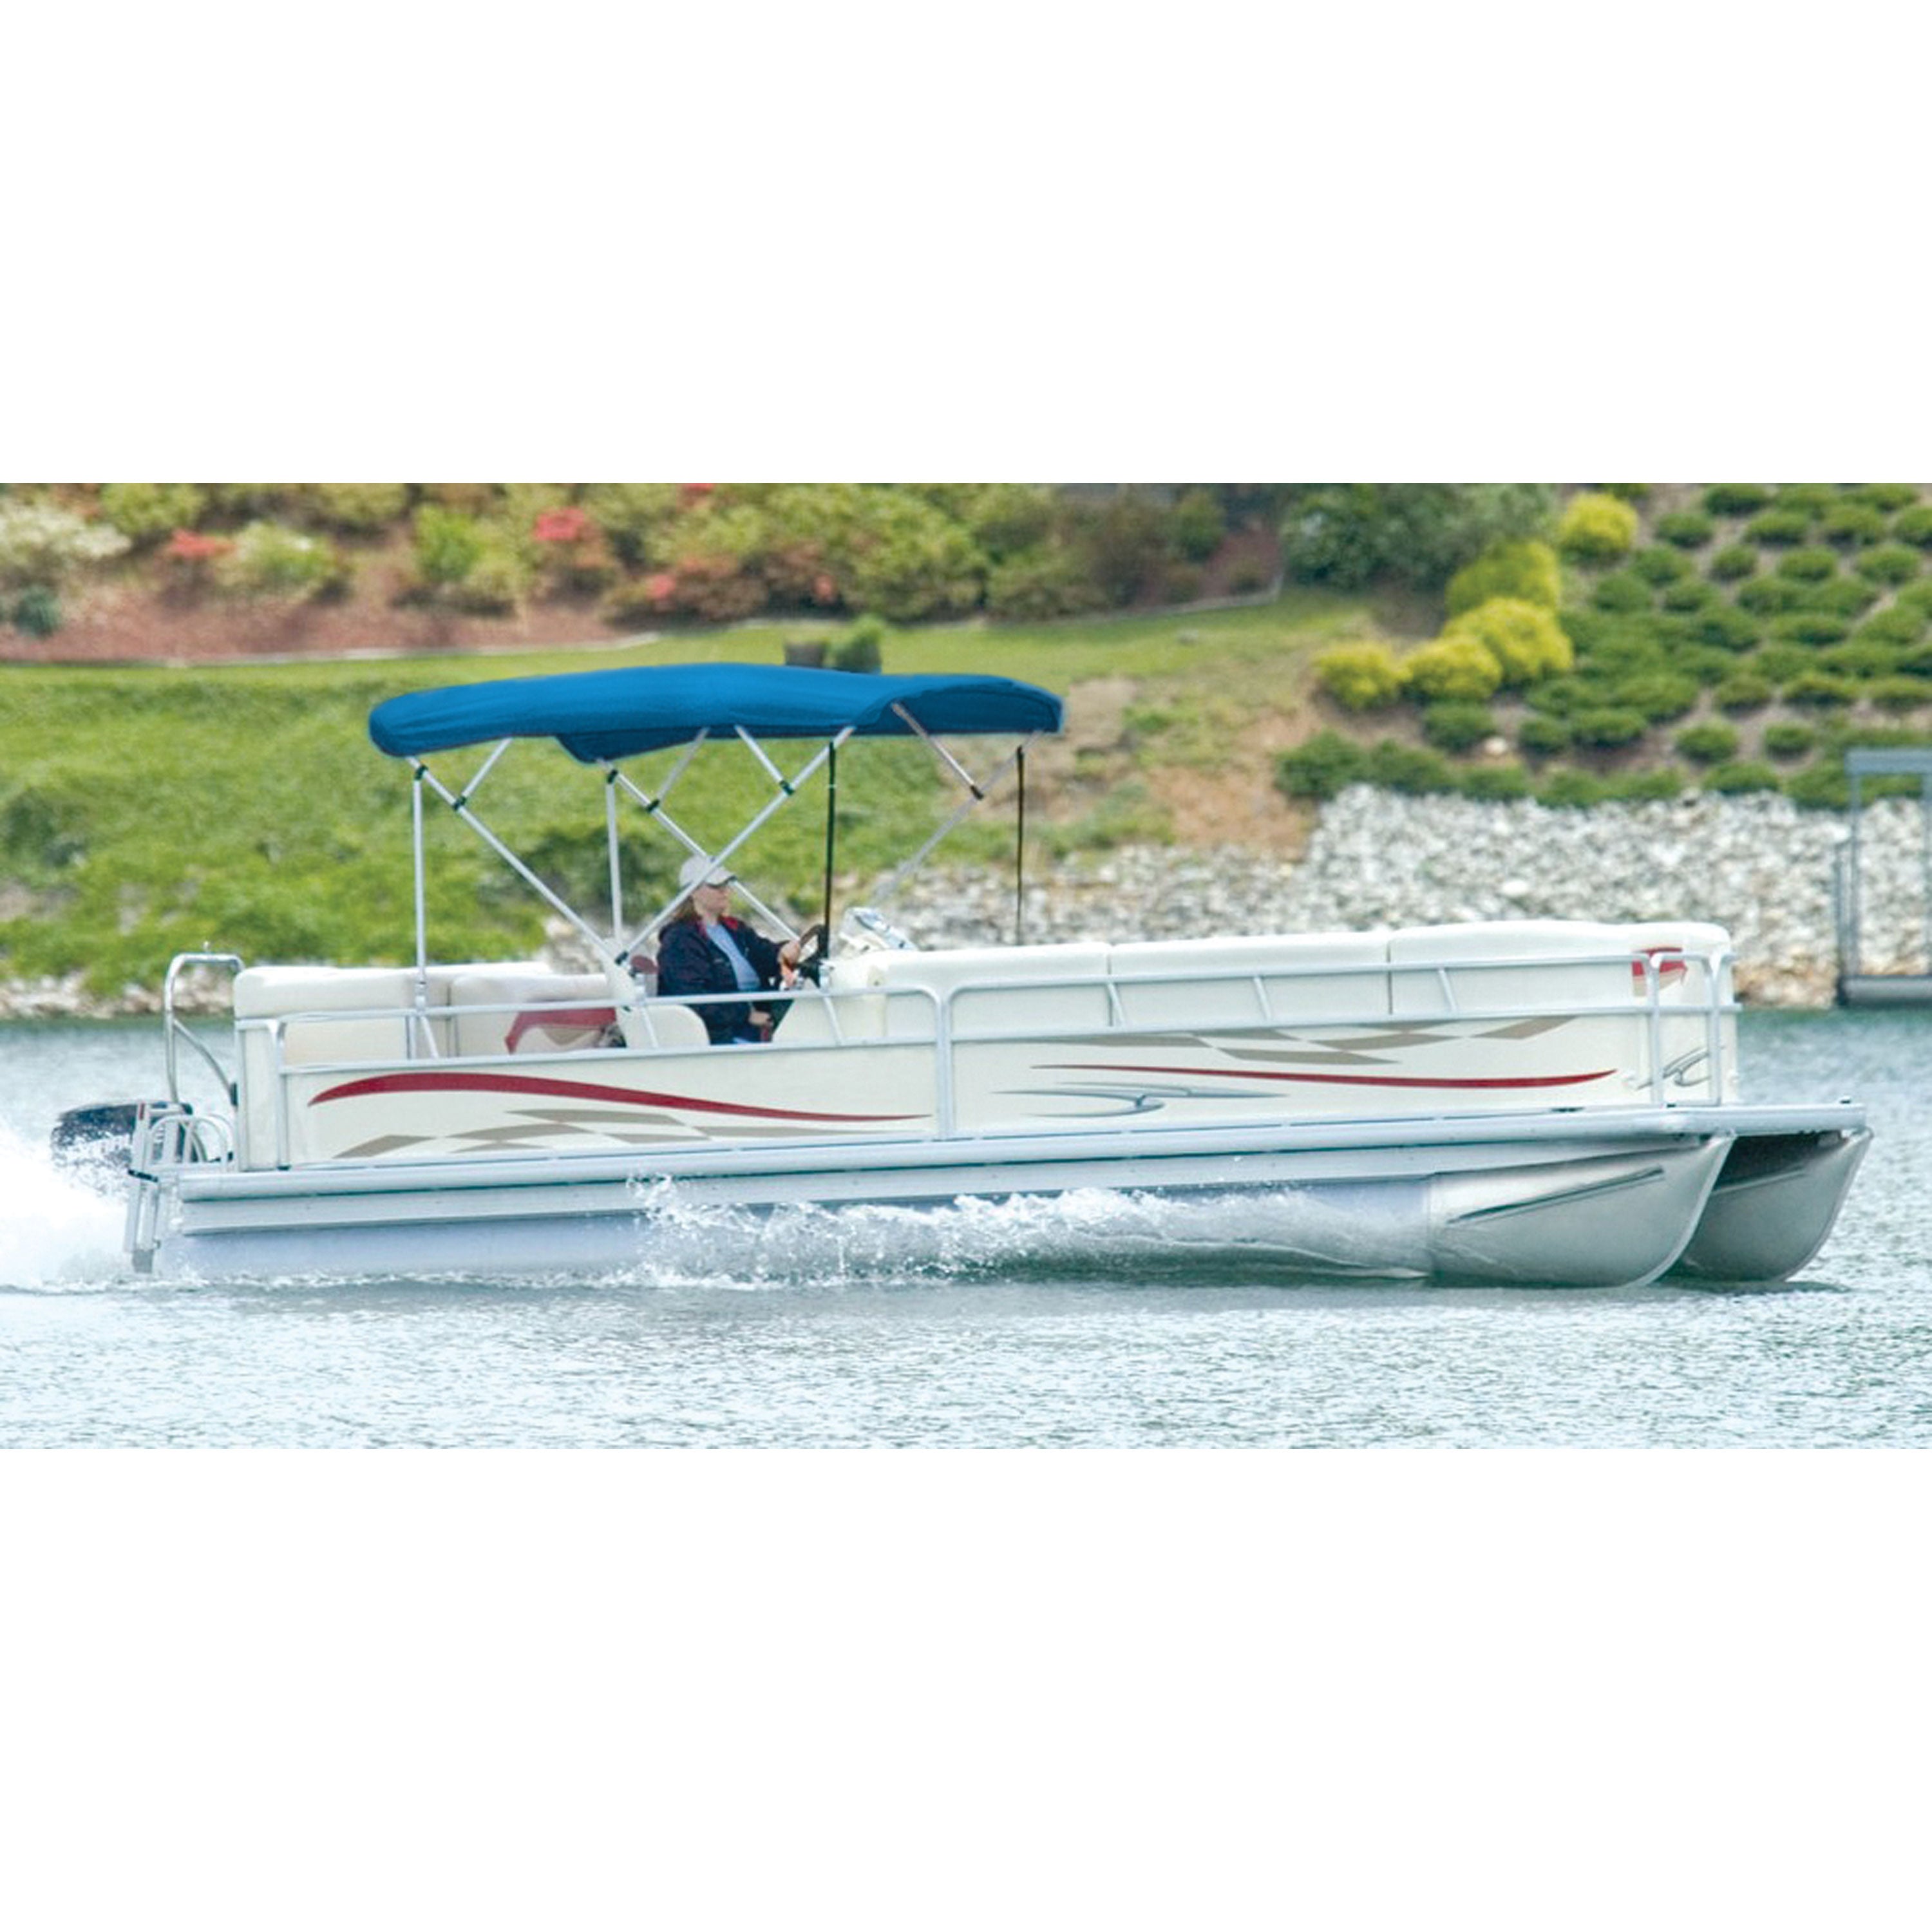 Carver 510AL04 Sunbrella Pontoon Bimini Top with Running Light Cut-Out - Pacific Blue, Fits Frame 50510